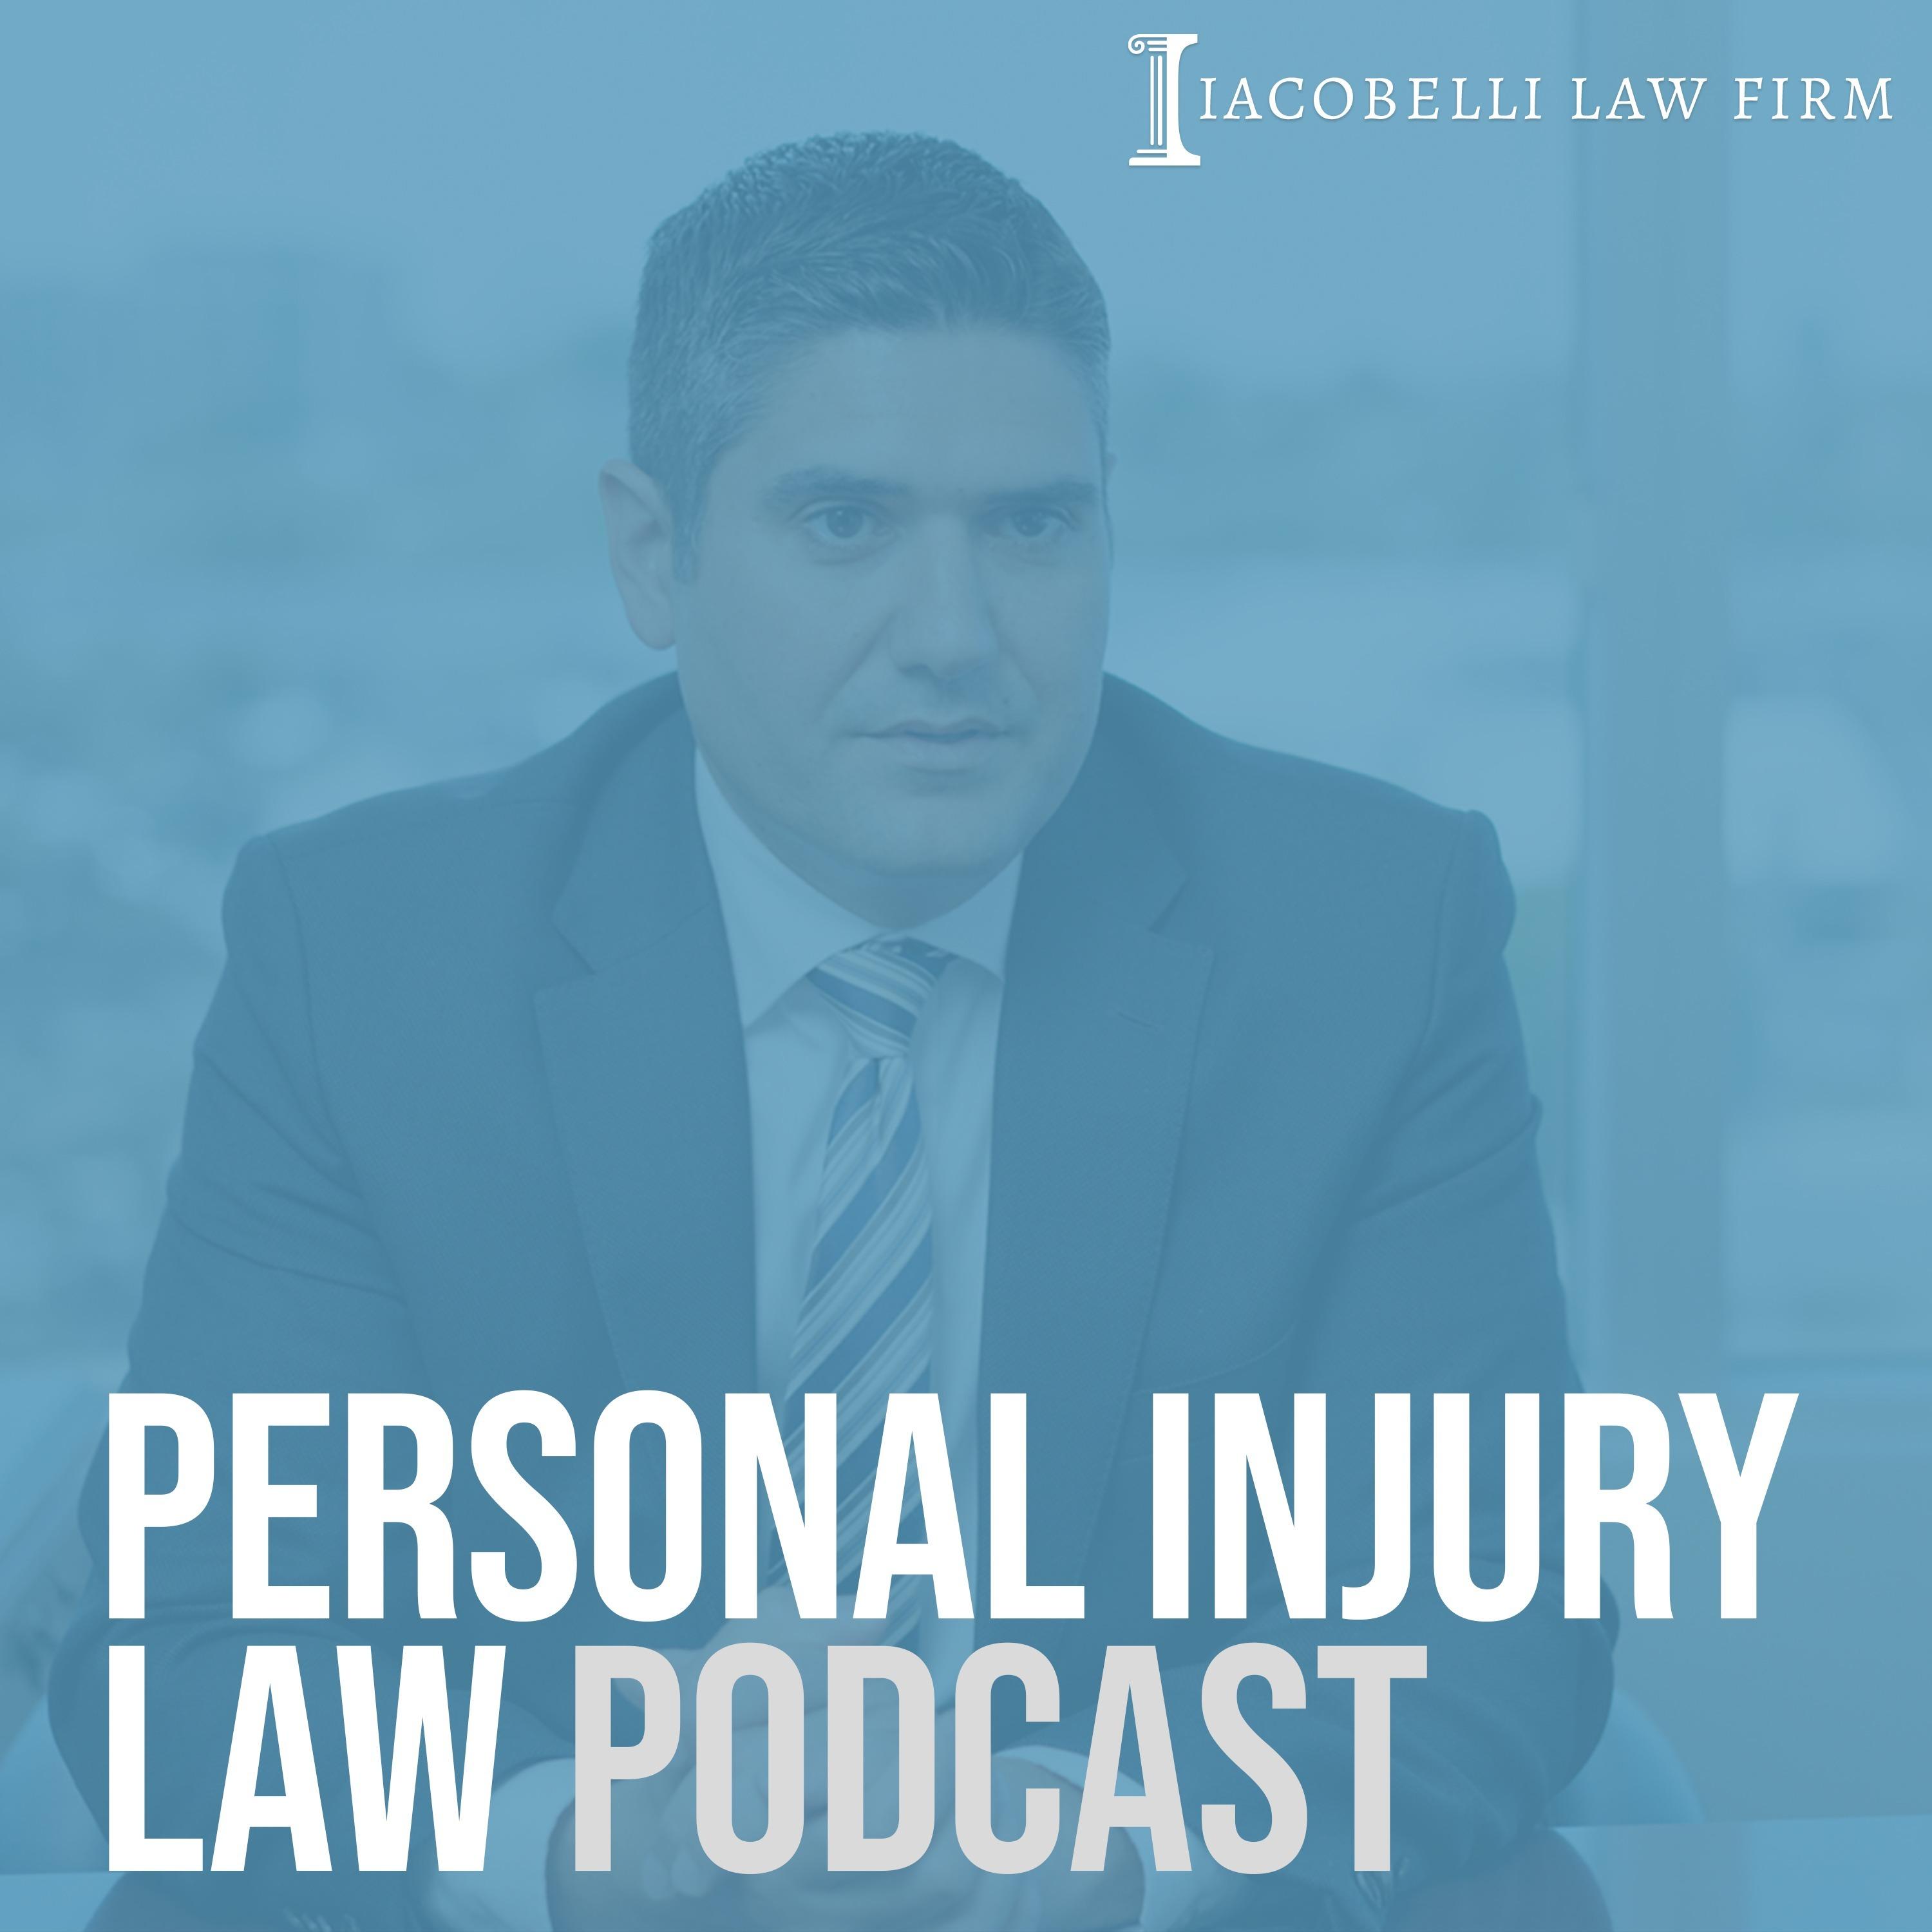 Personal Injury Law Podcast | Iacobelli Law Firm